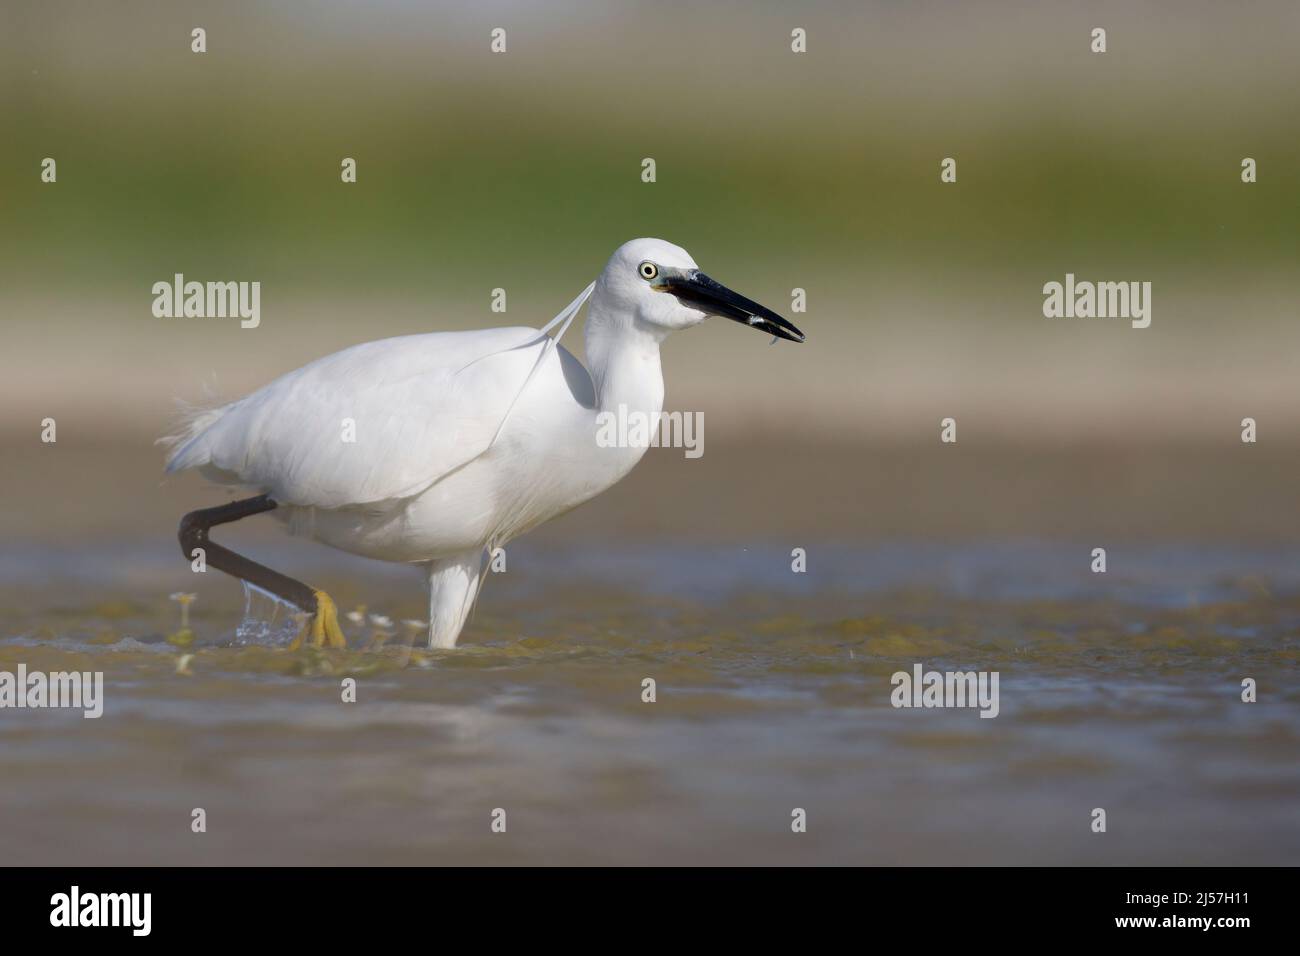 Little egret, Fiumicino (RM), Italy, May 2017 Stock Photo